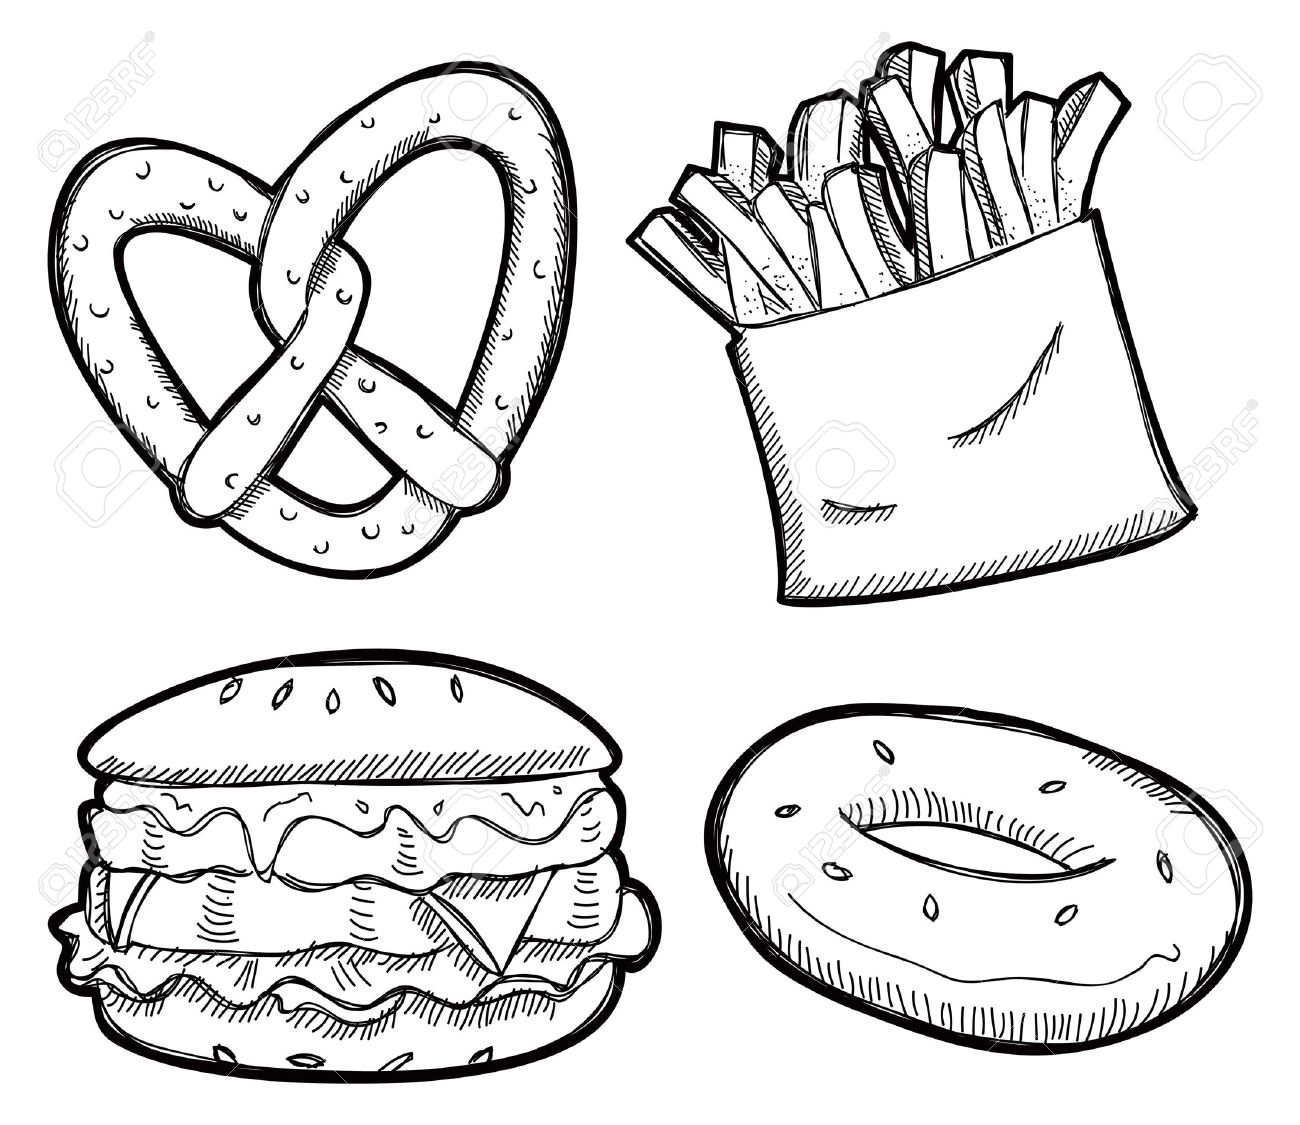 Snacks clipart black and white snack